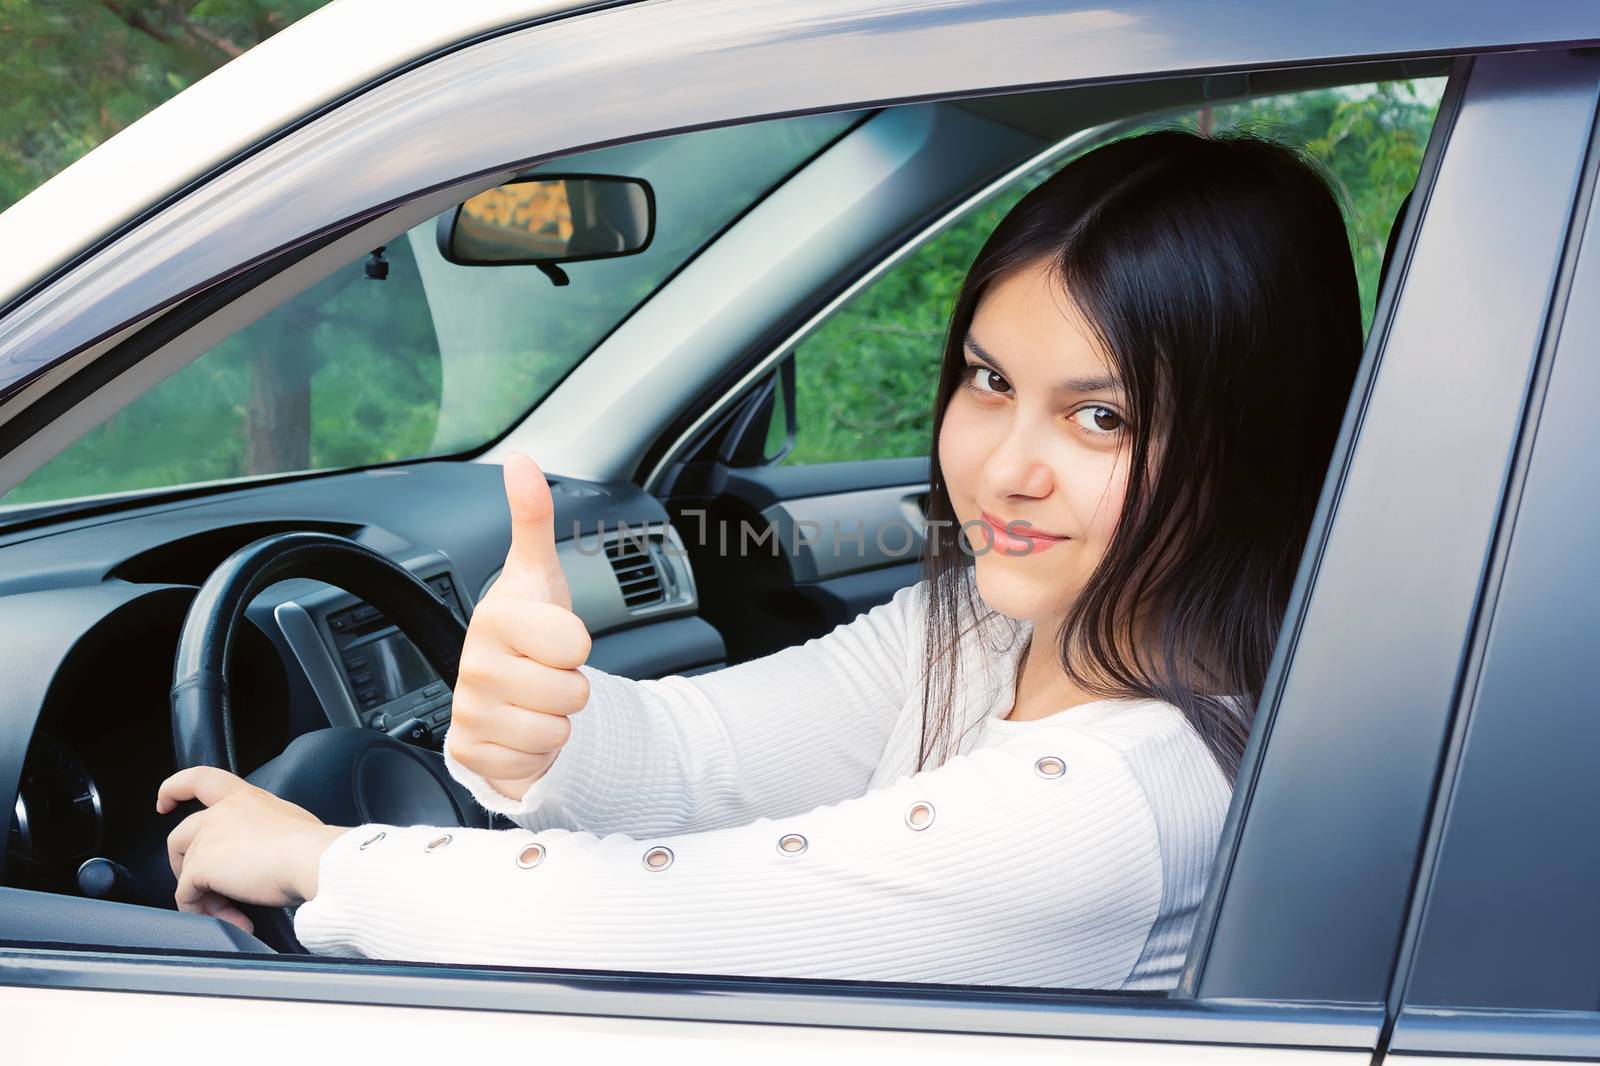 Happy young girl with long dark hair driving a car and gesturing thumb up.